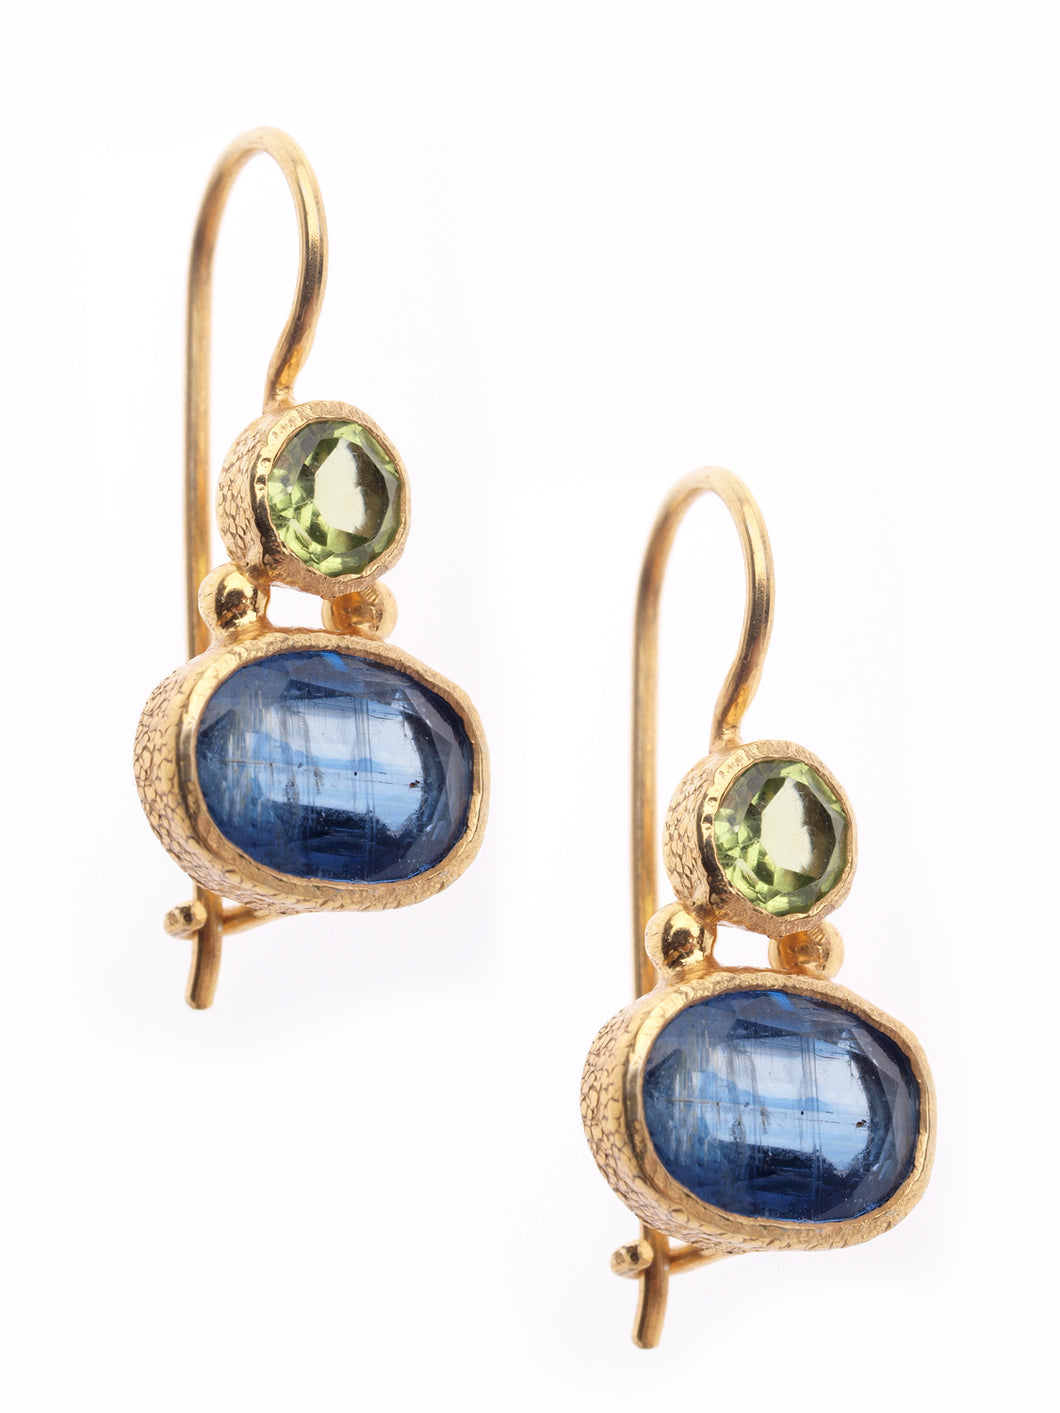 Peridot and Iolite Drop Earrings in 24kt gold vermeil E219-PI